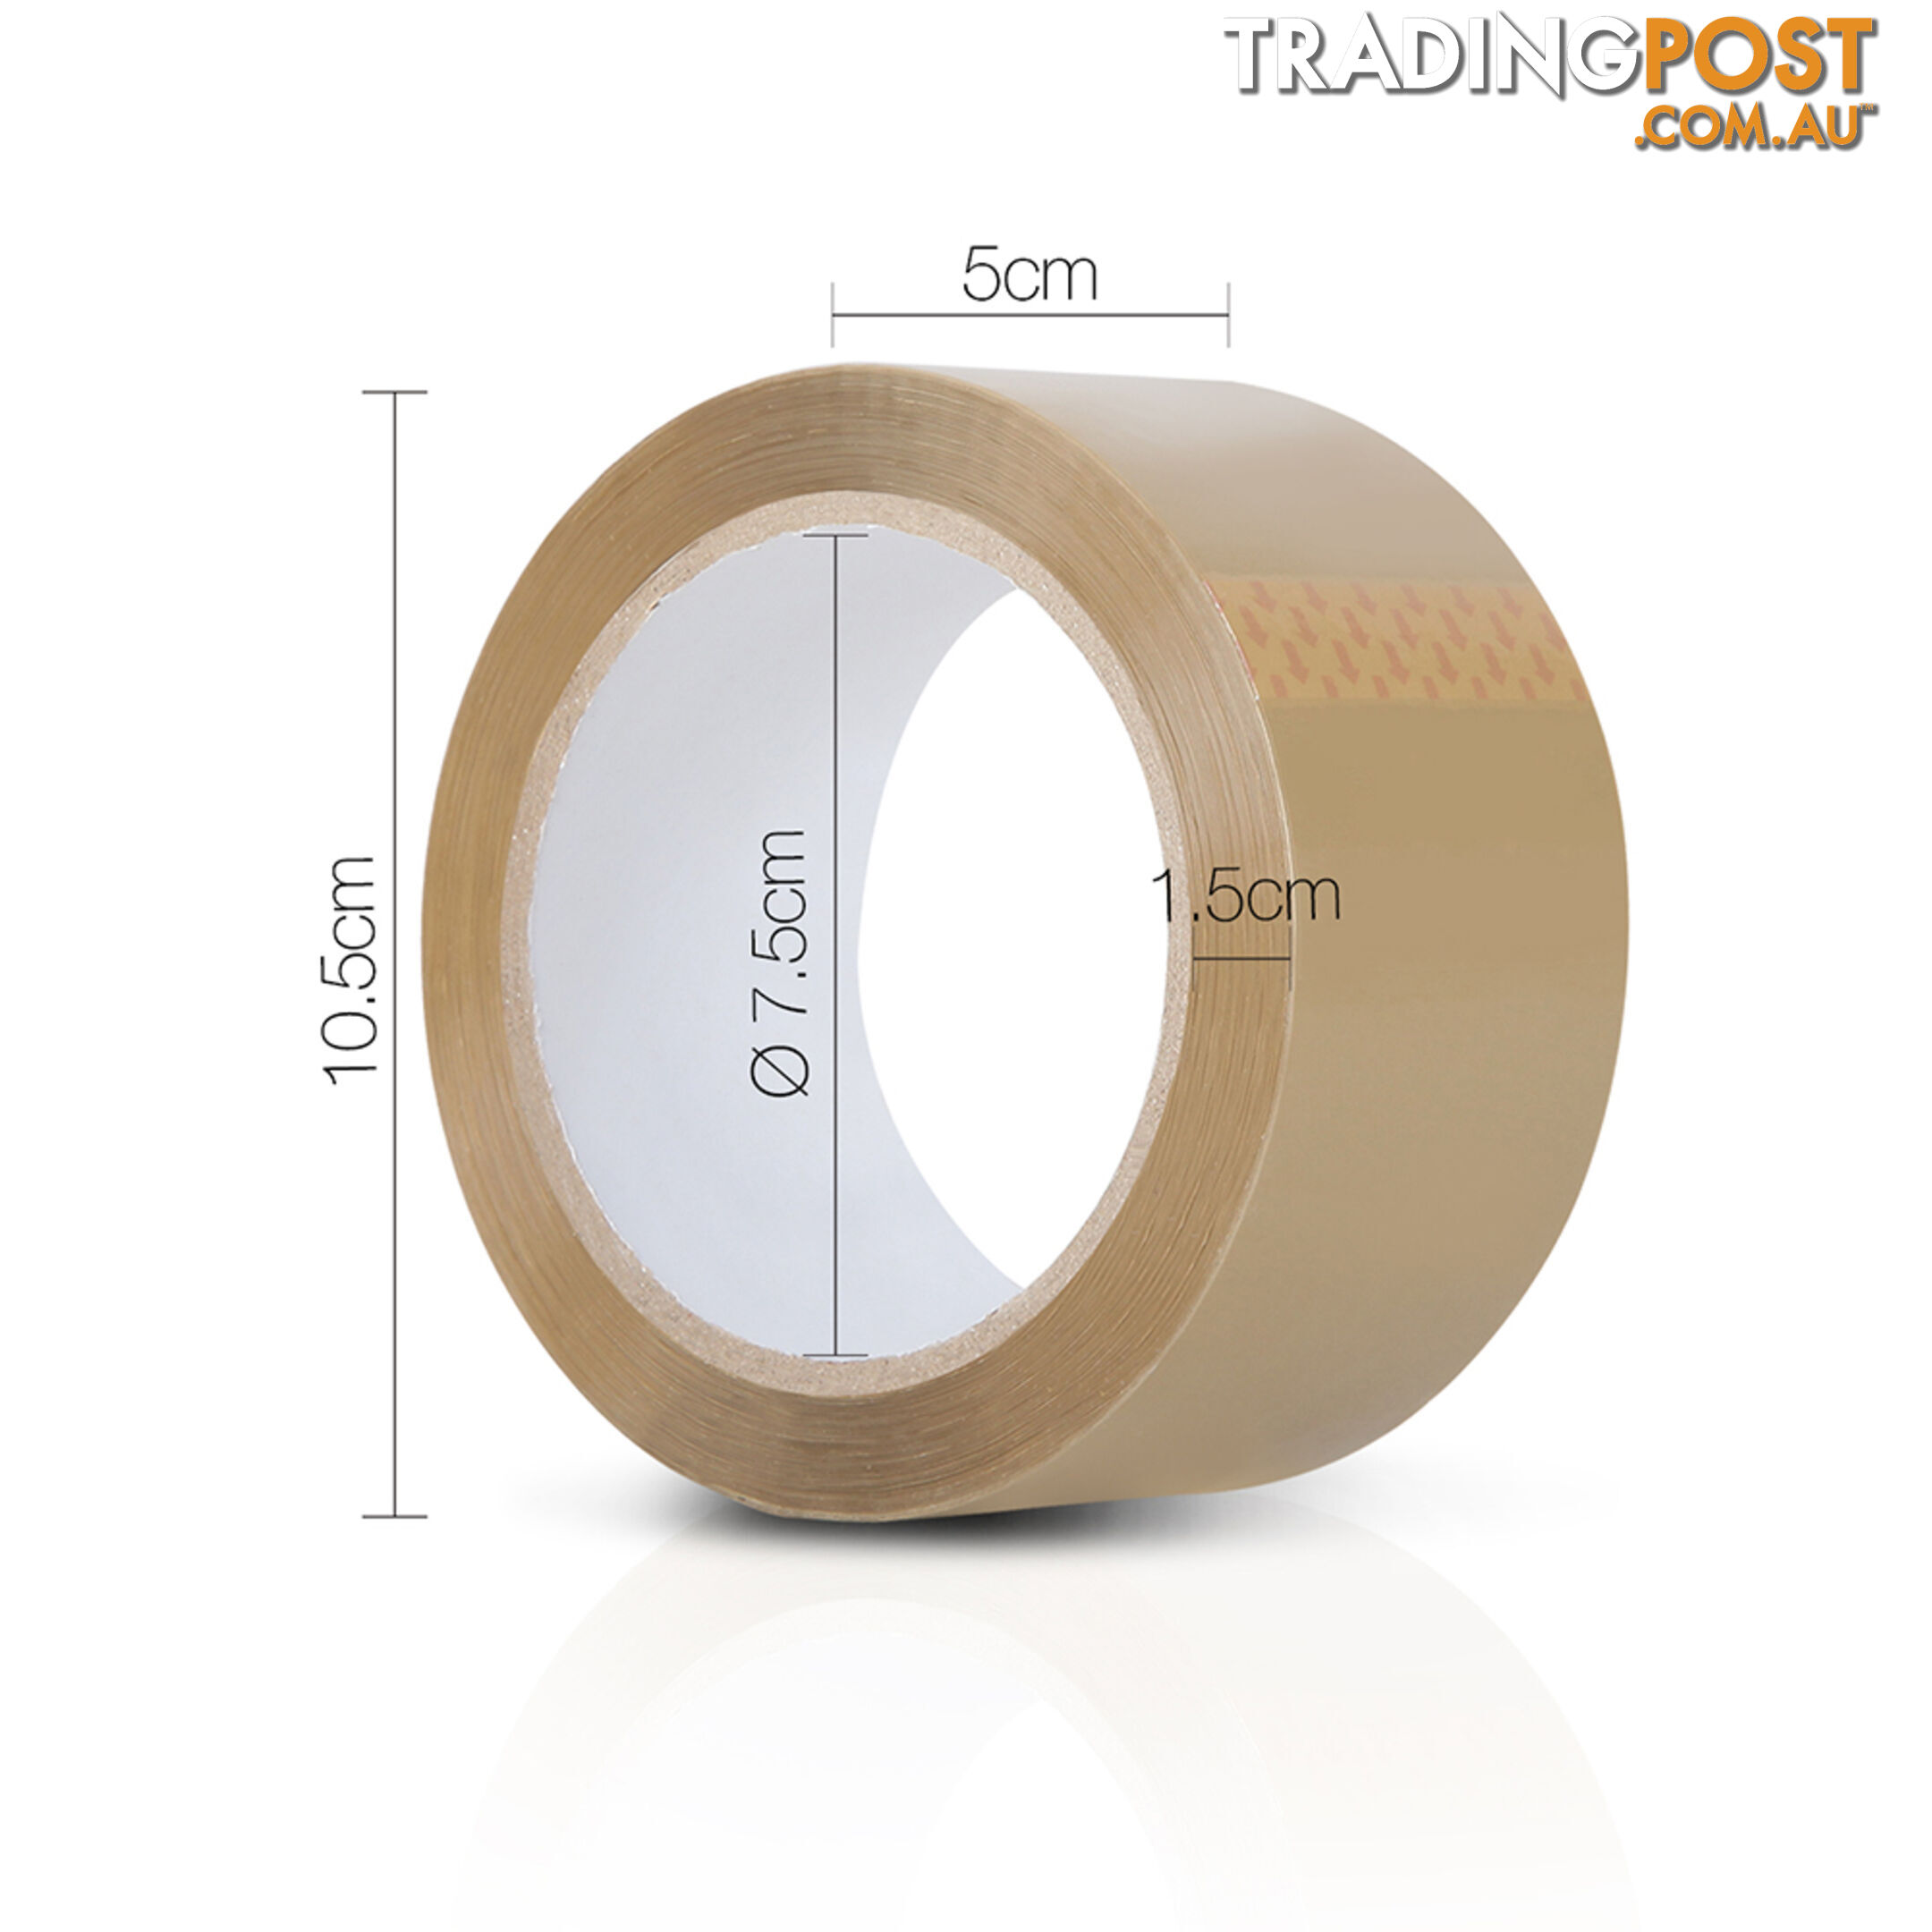 36 Rolls Packing Tape - 48mm x 75m - Brown